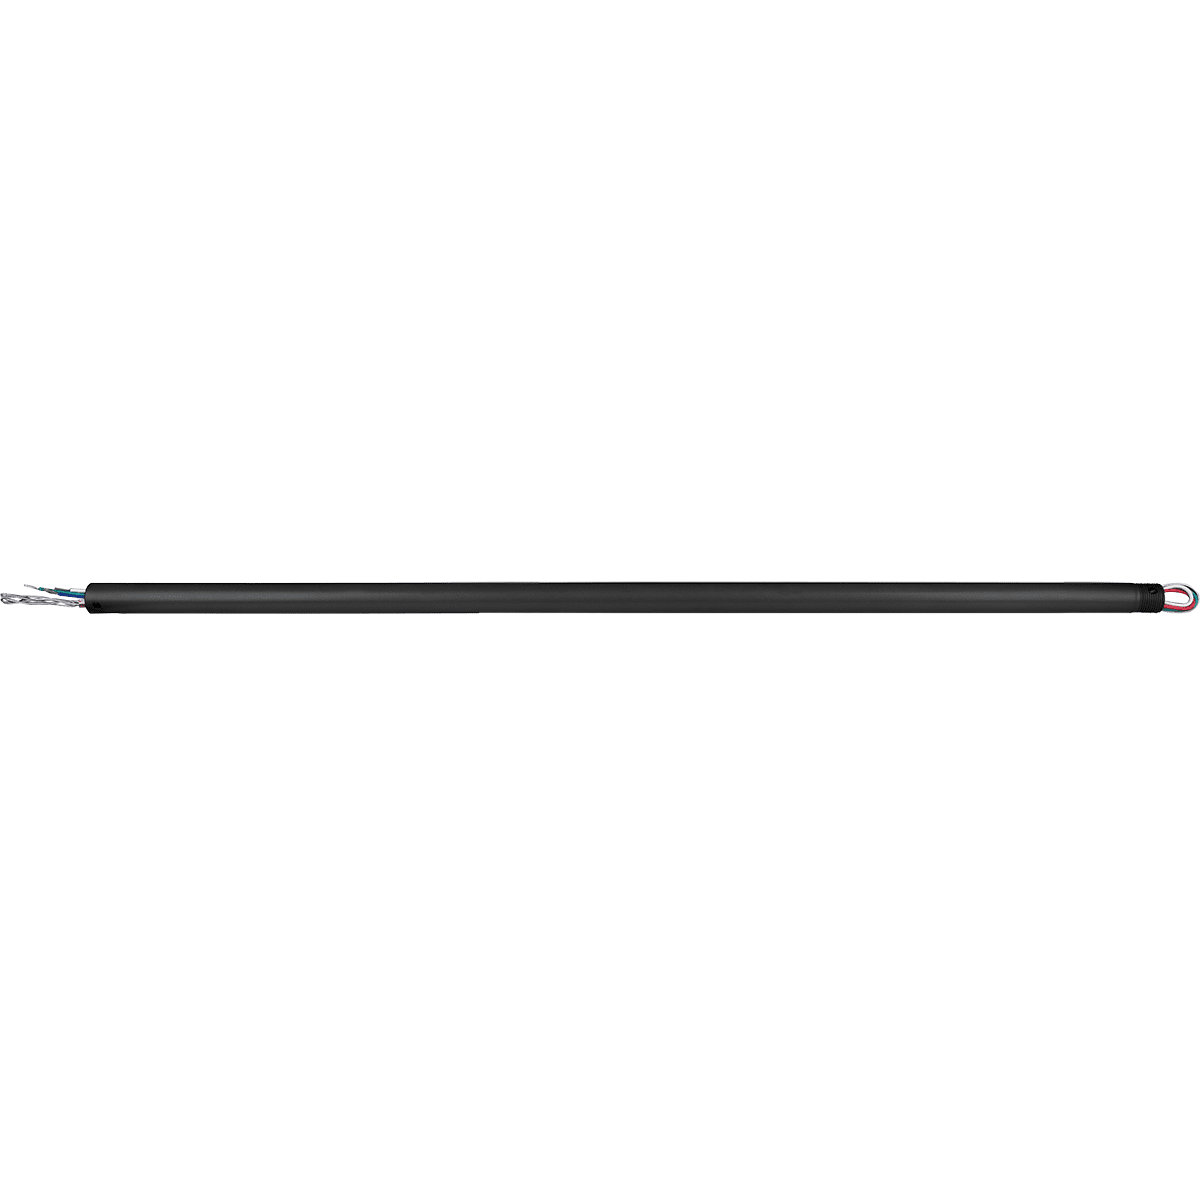 Canarm Optional 36-in Downrod For FANBOS Fans - Black (DR36-CPBK)